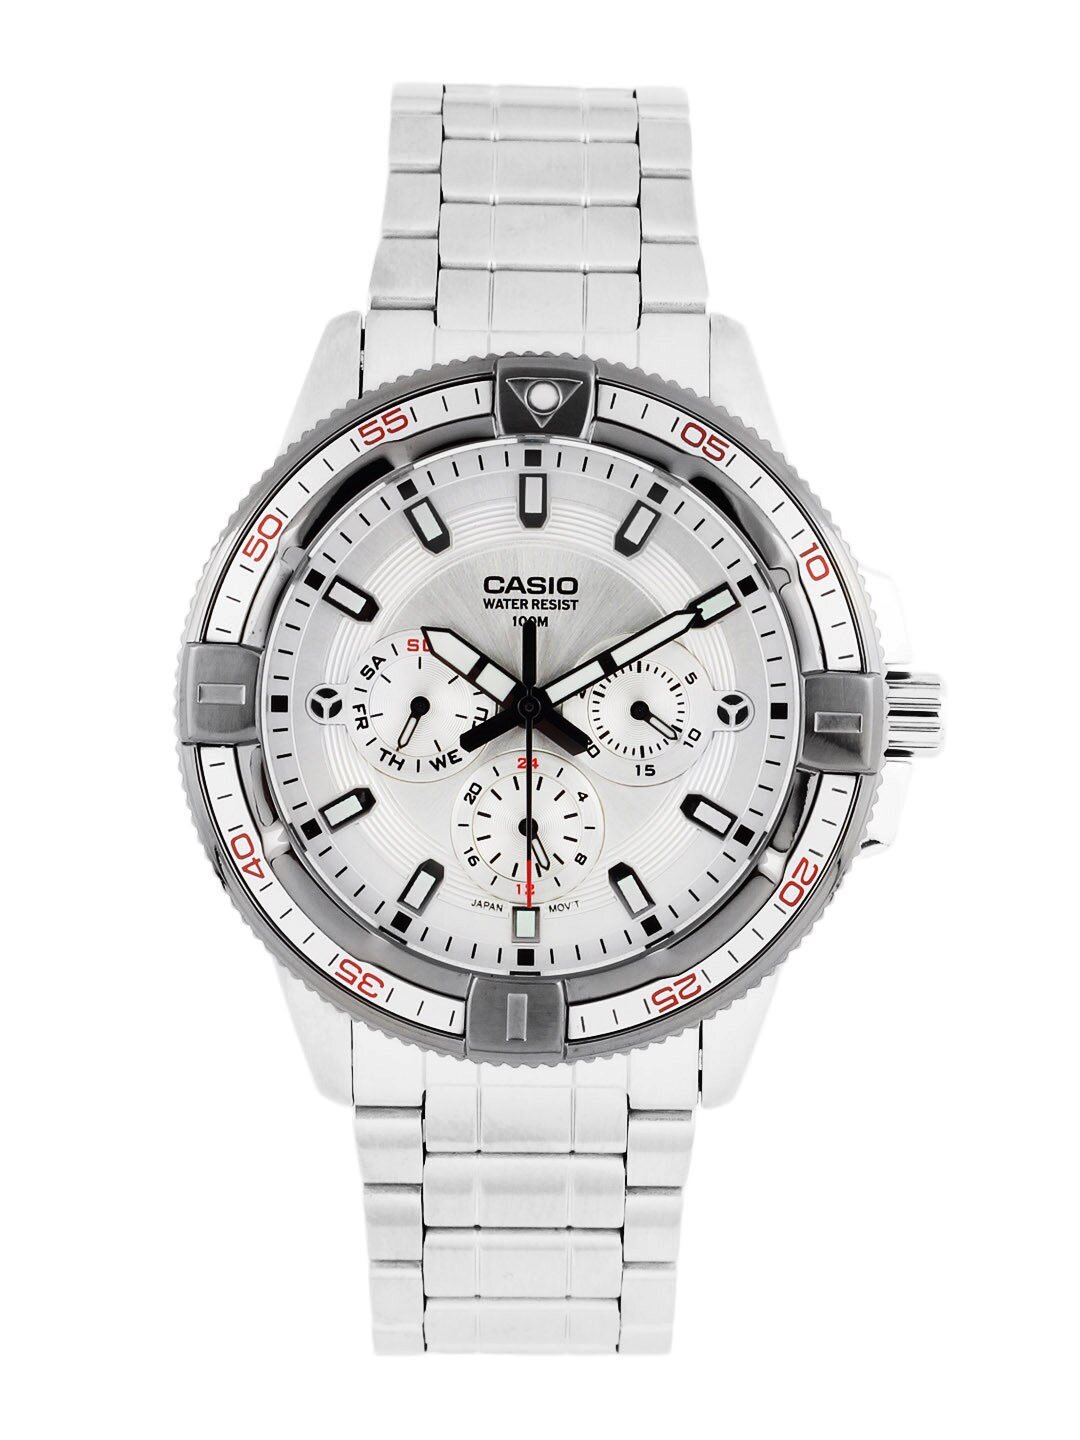 CASIO ENTICER Men White Dial Chronograph Watch A656